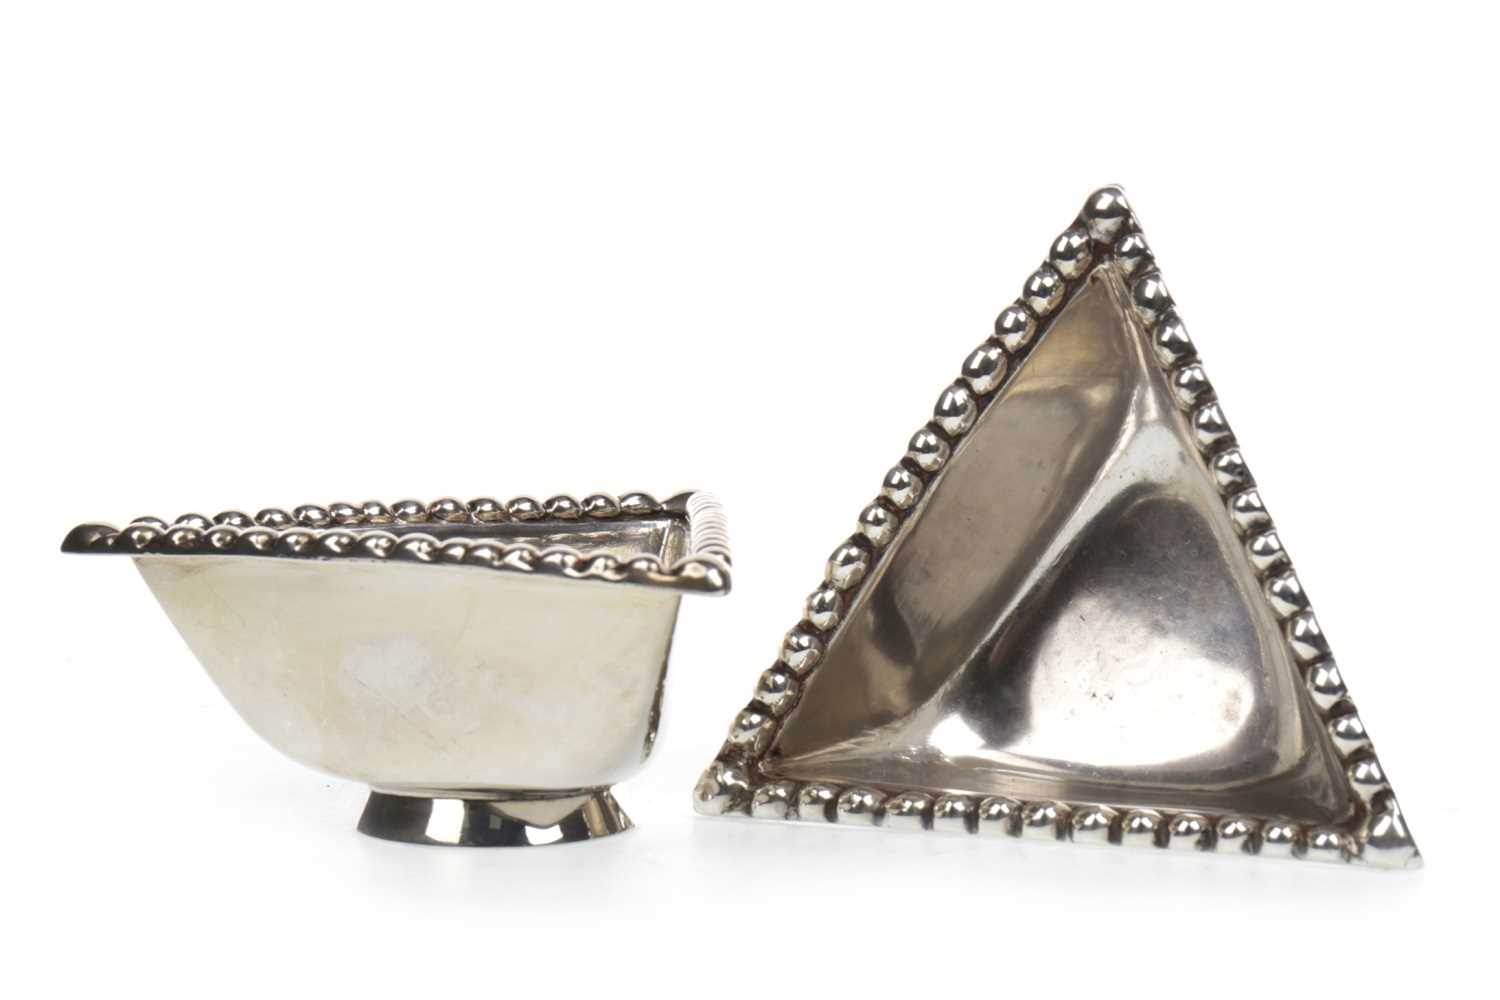 Lot 899 - A LOT OF TWO SILVER SALT DISHES MODELLED AFTER THE TRAPRAIN TREASURE